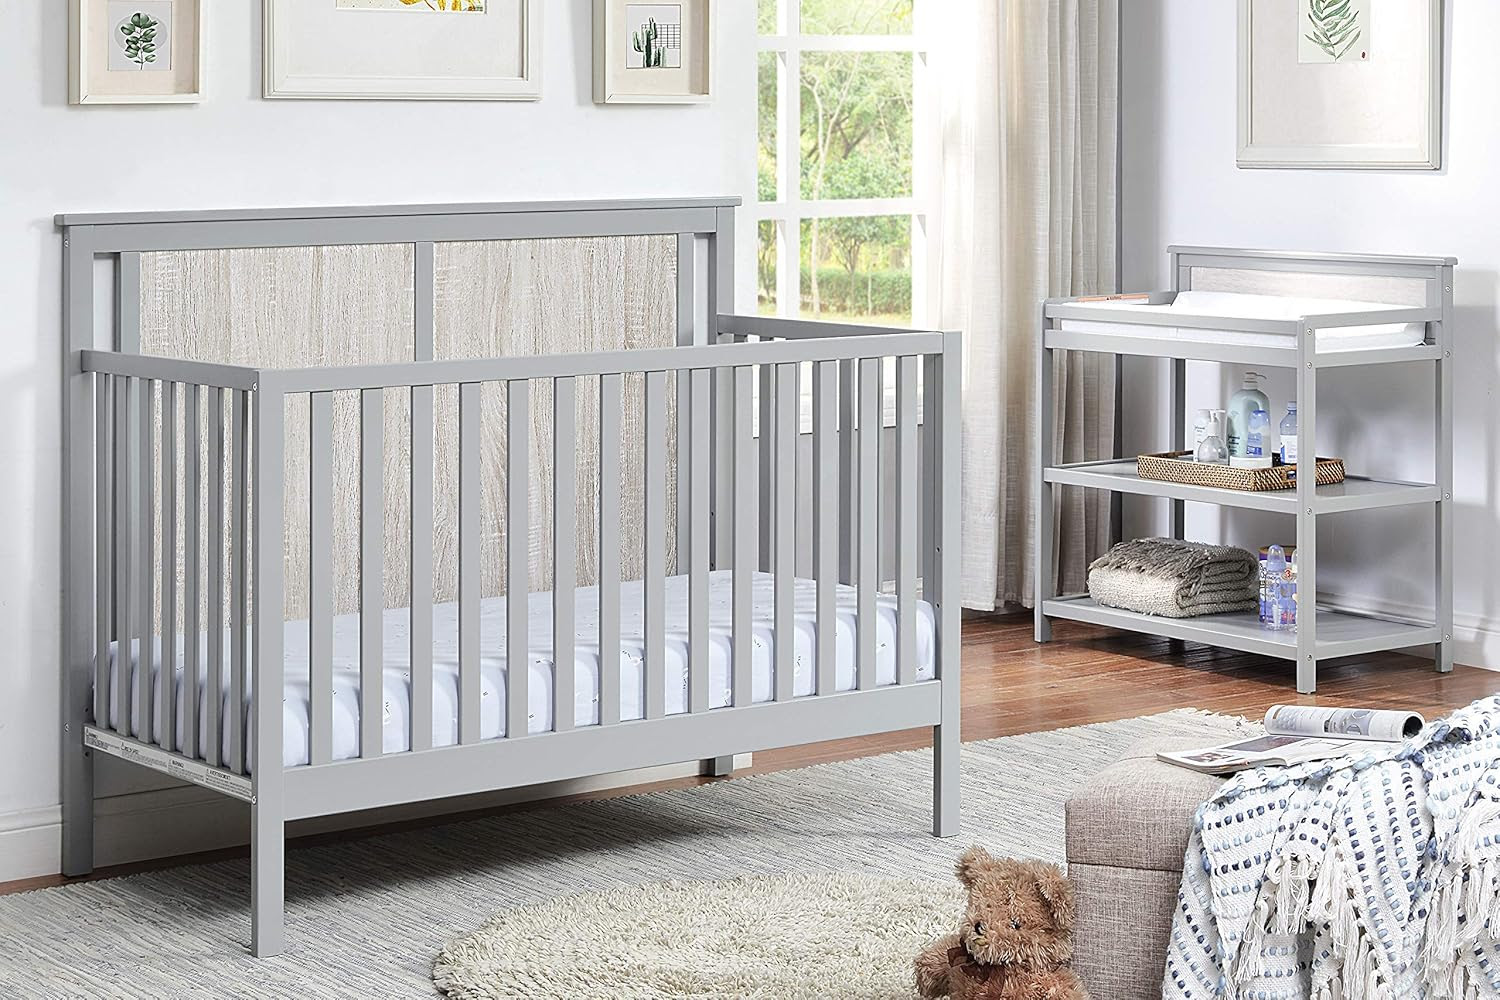 Suite Bebe Connelly 4 in 1 Convertible Crib. 600 units.  EXW Philadelphia $75.00 unit.